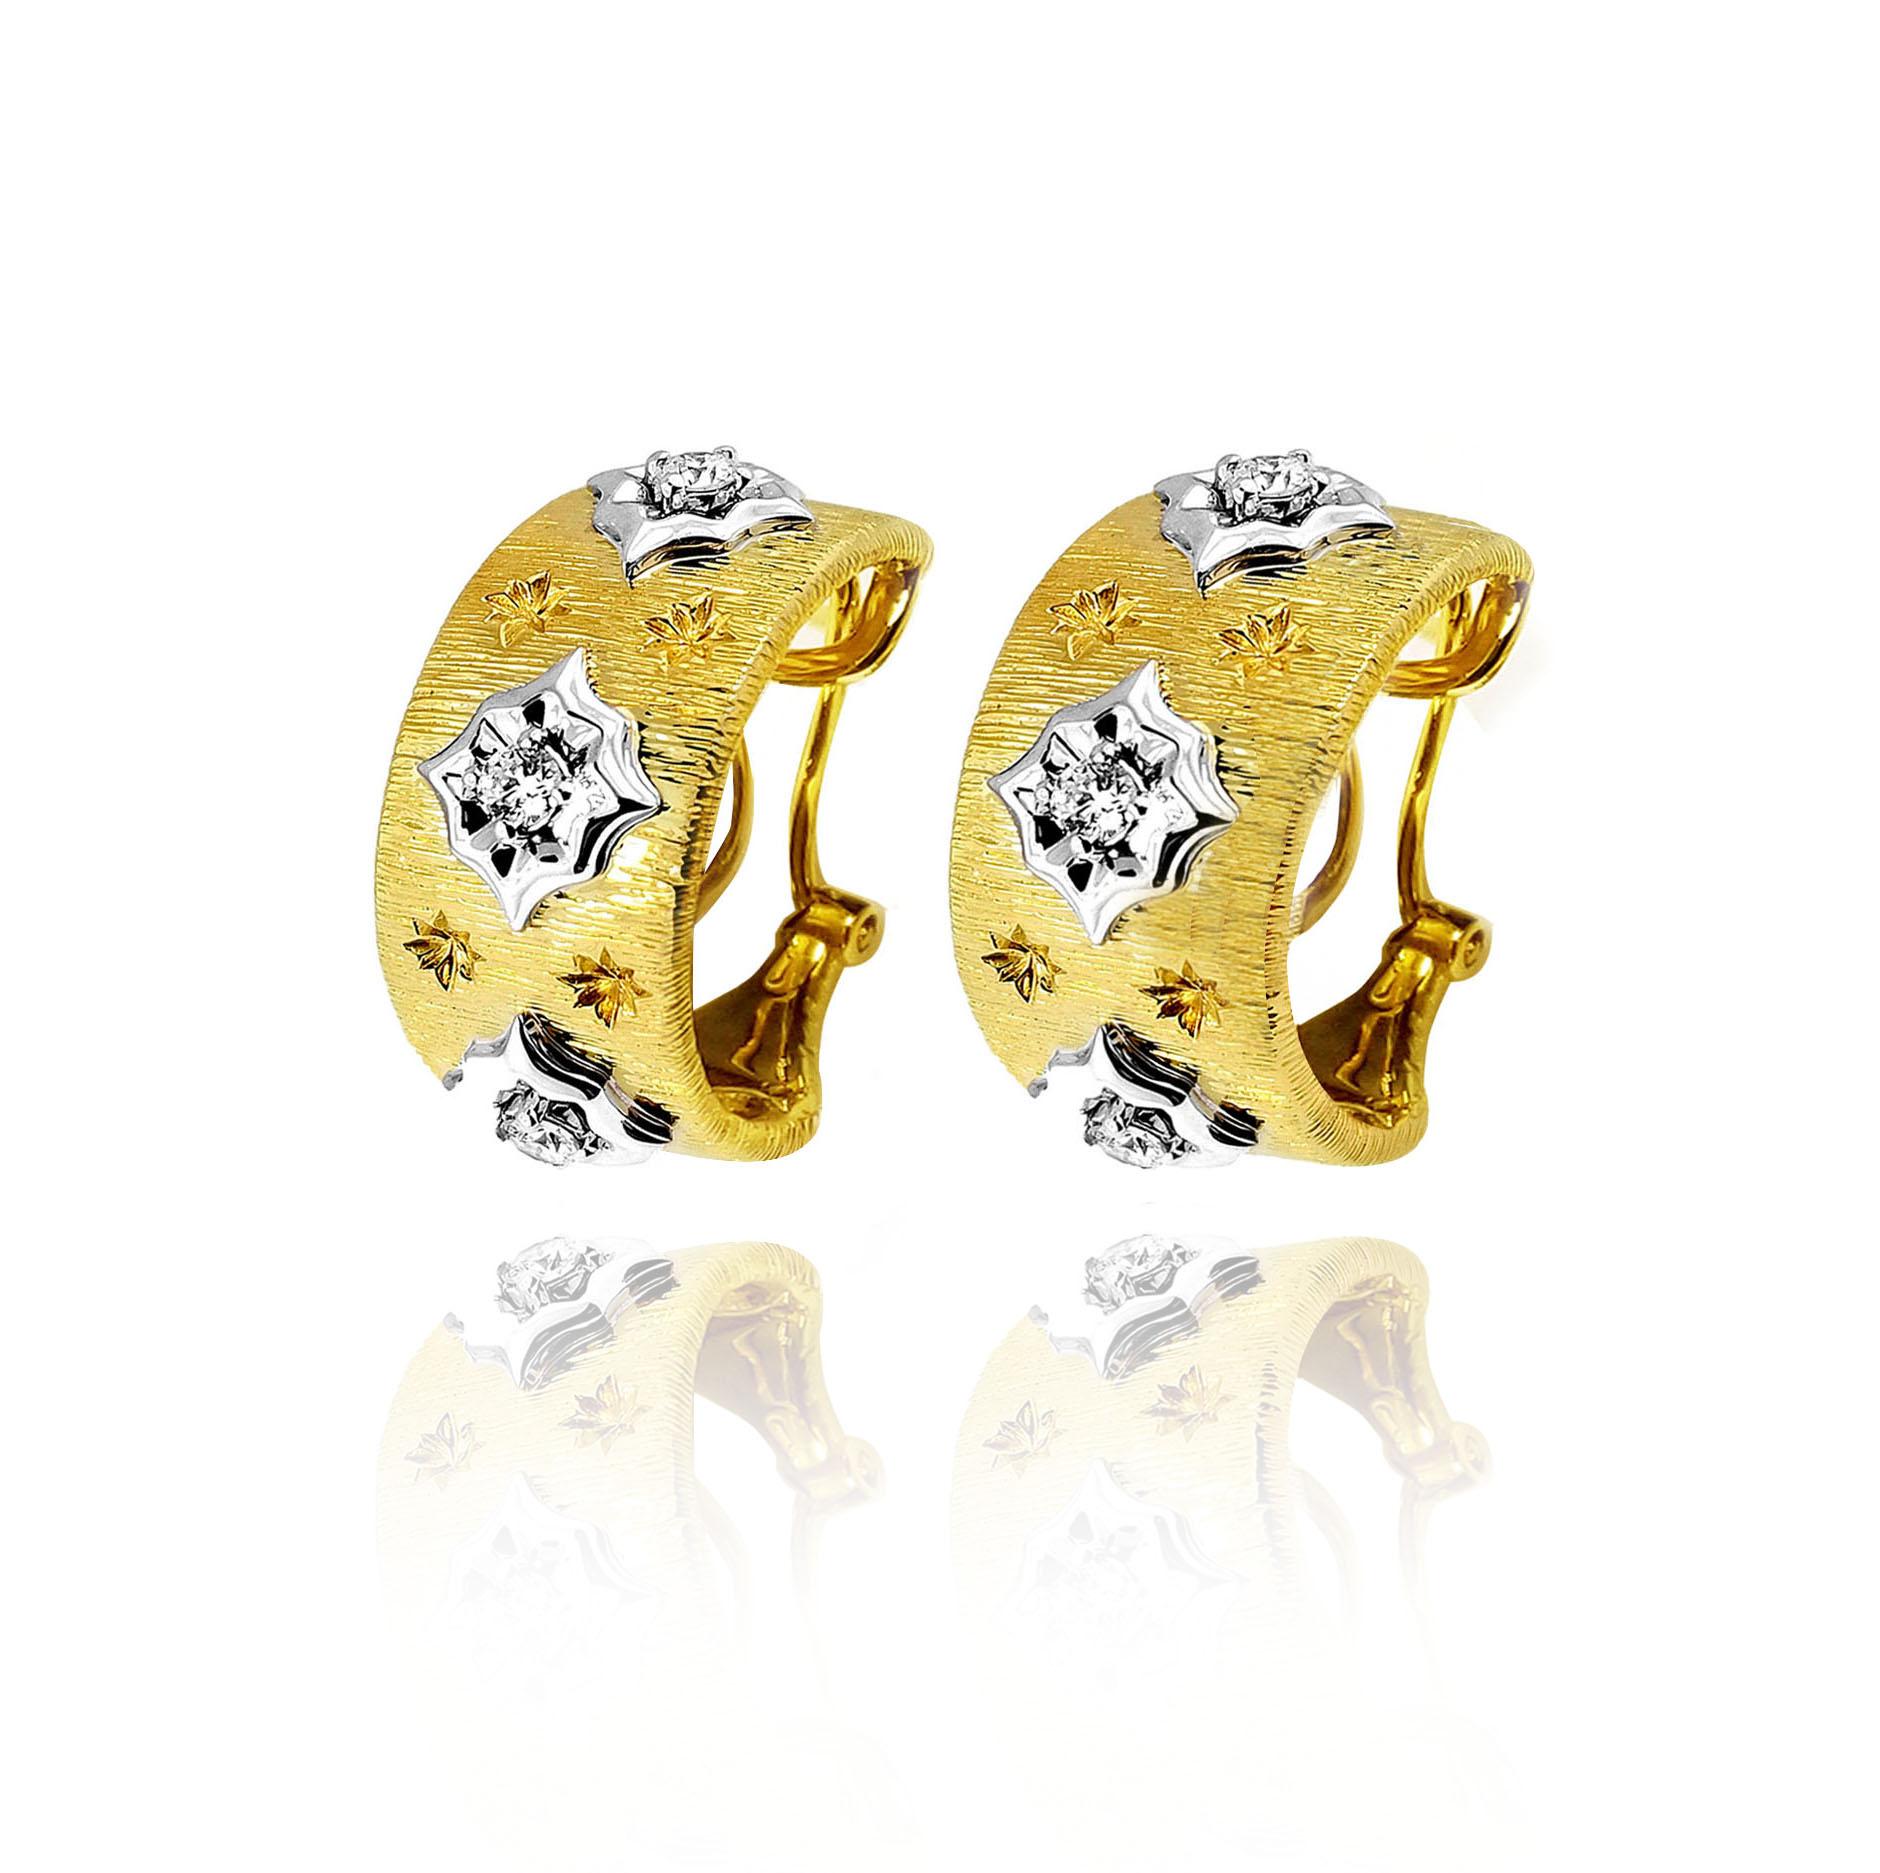 Produced by award winning Italian designer Stefano Vitolo. Stefano creates custom artisanal one of a kind jewelry with excellent gemstones in a truly old world Italian craftmanship.
These handcrafted earrings have 0.11 total carat weight of F/G